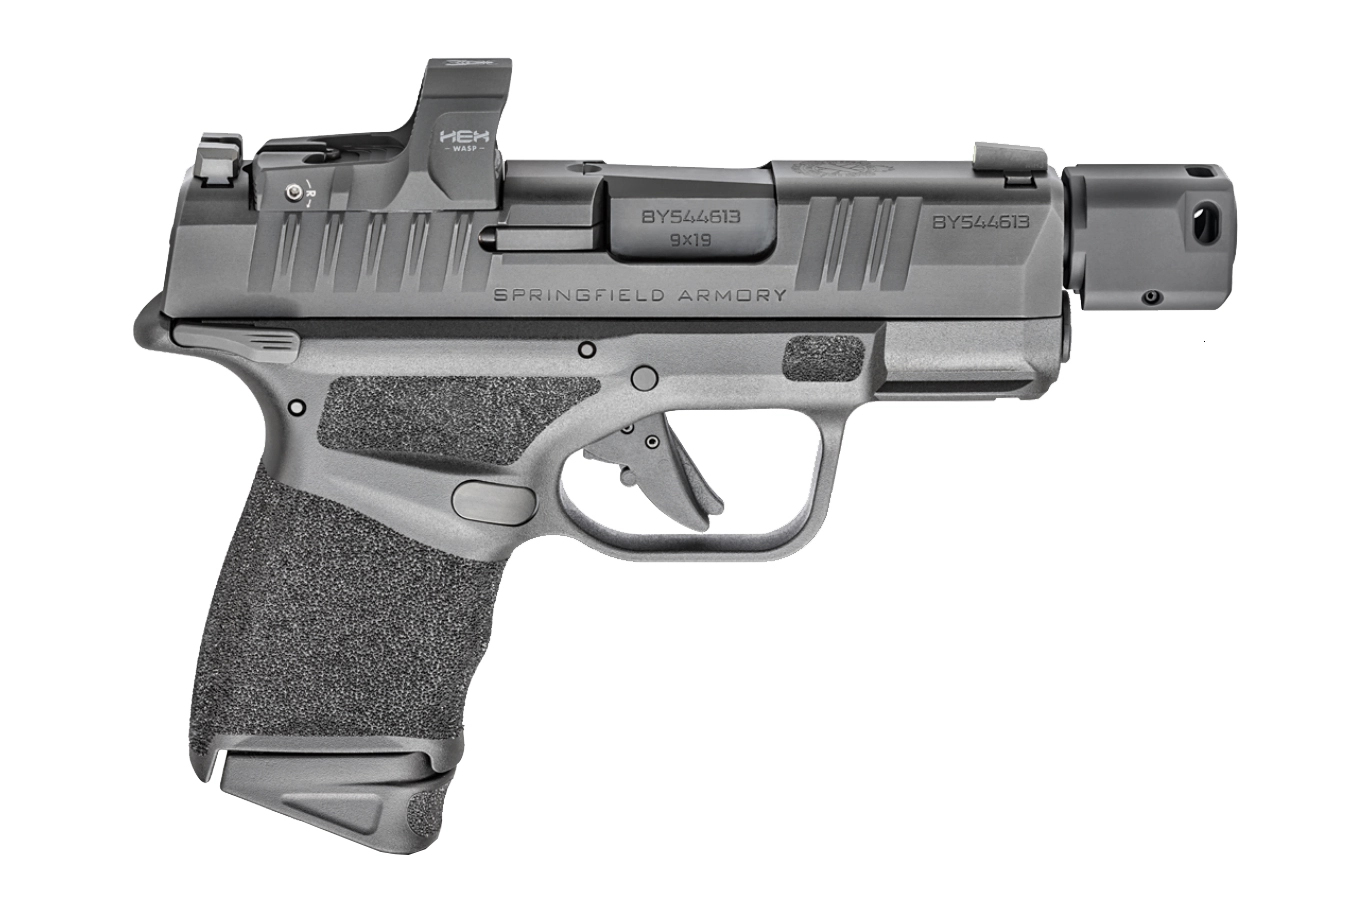 Springfield, Hellcat RDP, Semi-automatic, Striker Fired, Sub-Compact, Optics Ready, 9MM, 3.8" Barrel w/ Compensator, Polymer Frame, Textured Grips, Tritium Night Sights, 2 Mags, 13Rd, Black, Includes HEX Wasp Red Dot